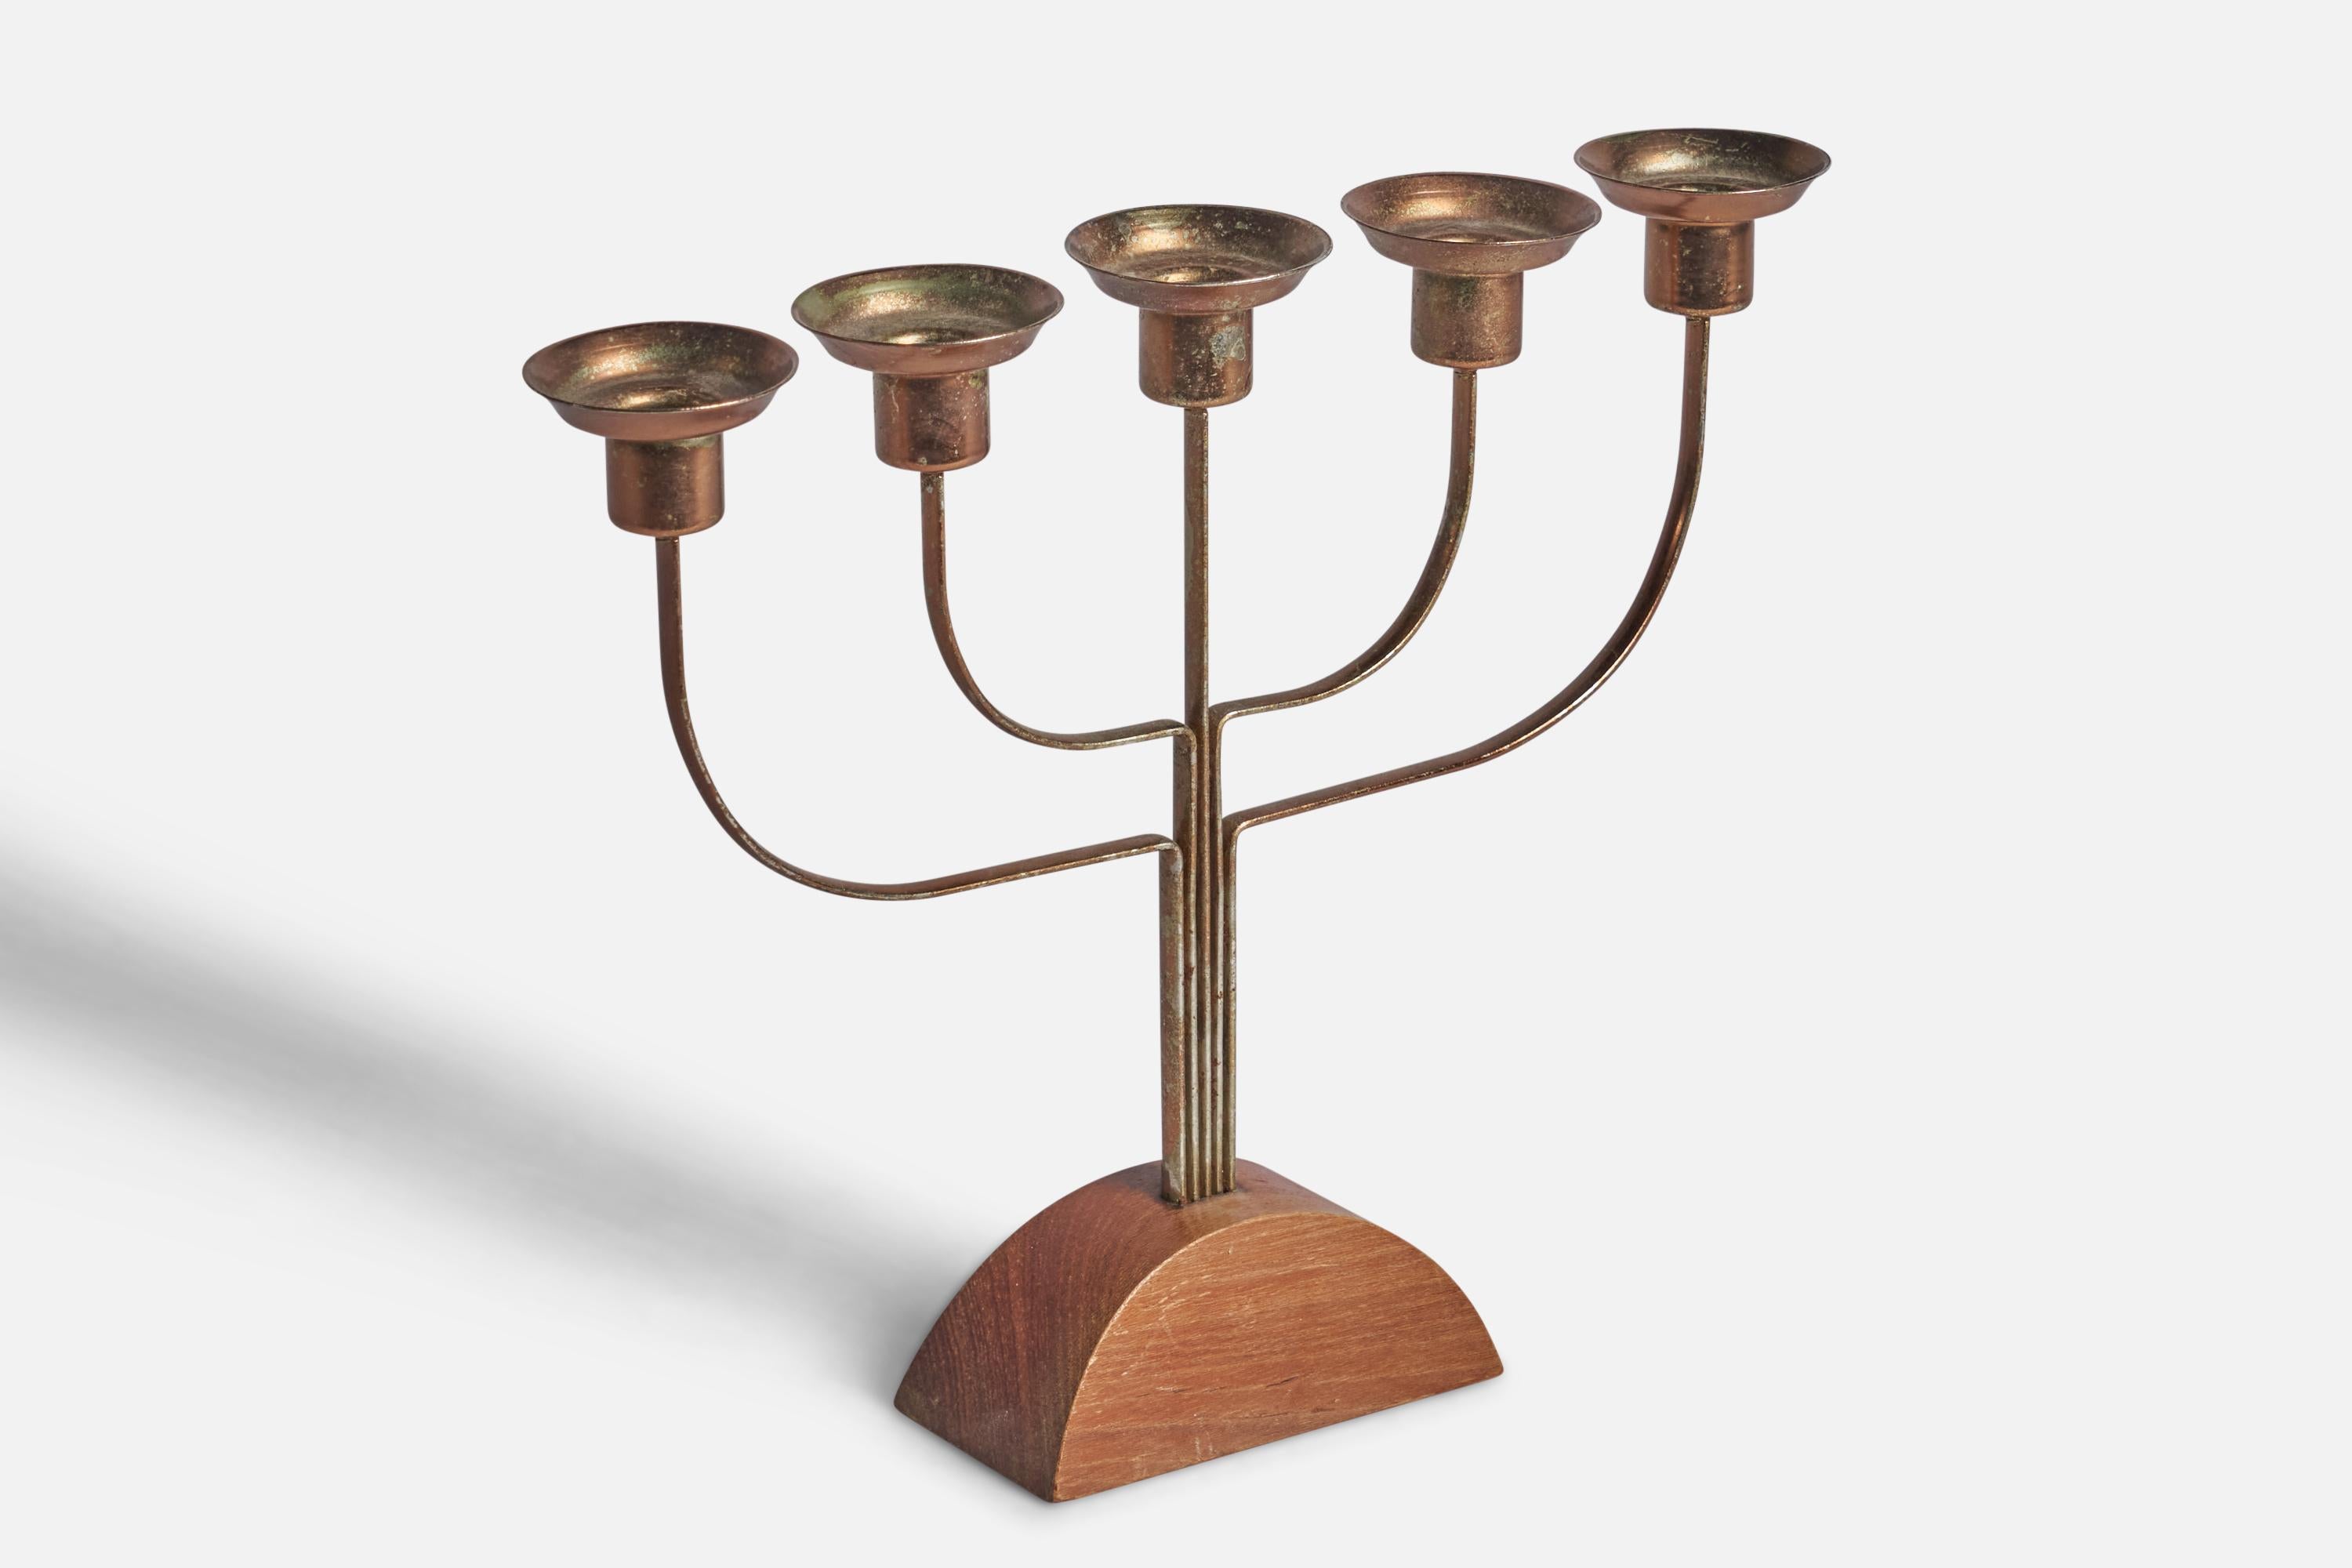 A brass and elm candelabra designed and produced in Sweden, c. 1940s.

fits 0.8” diameter candles